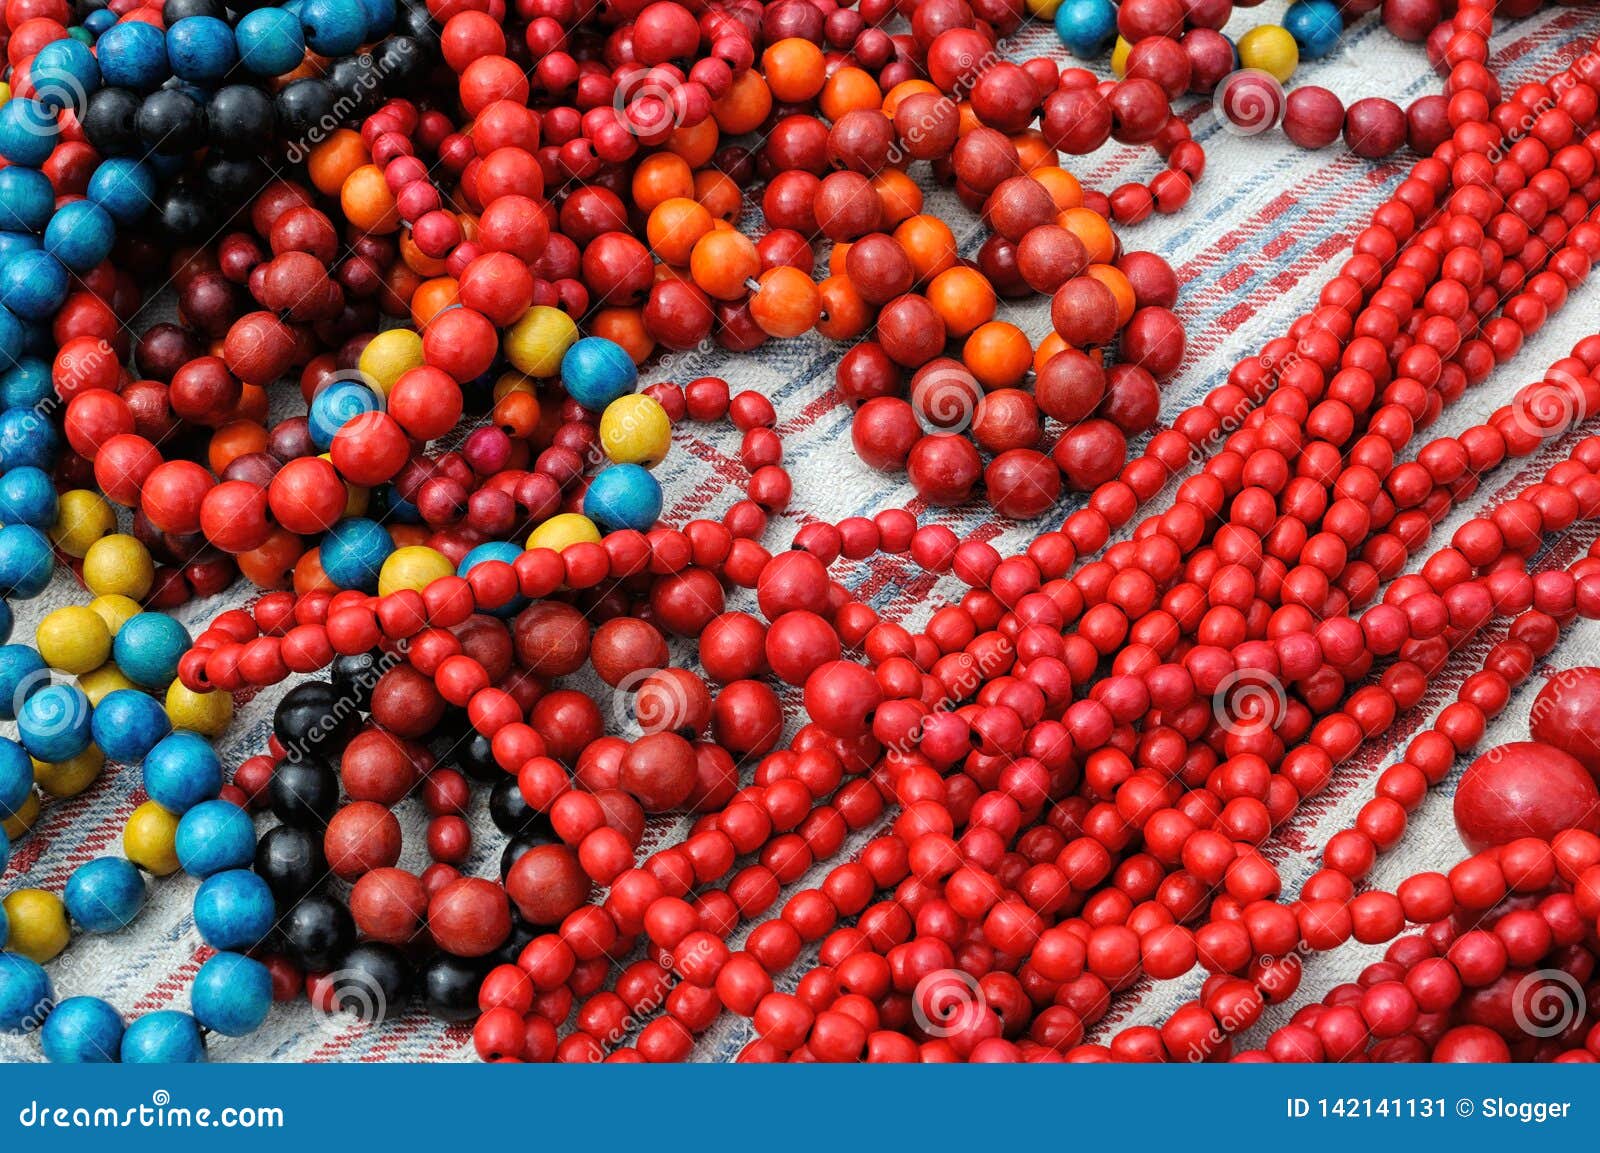 Traditional Colorful Ukrainian Wooden Beads Stock Image - Image of ...